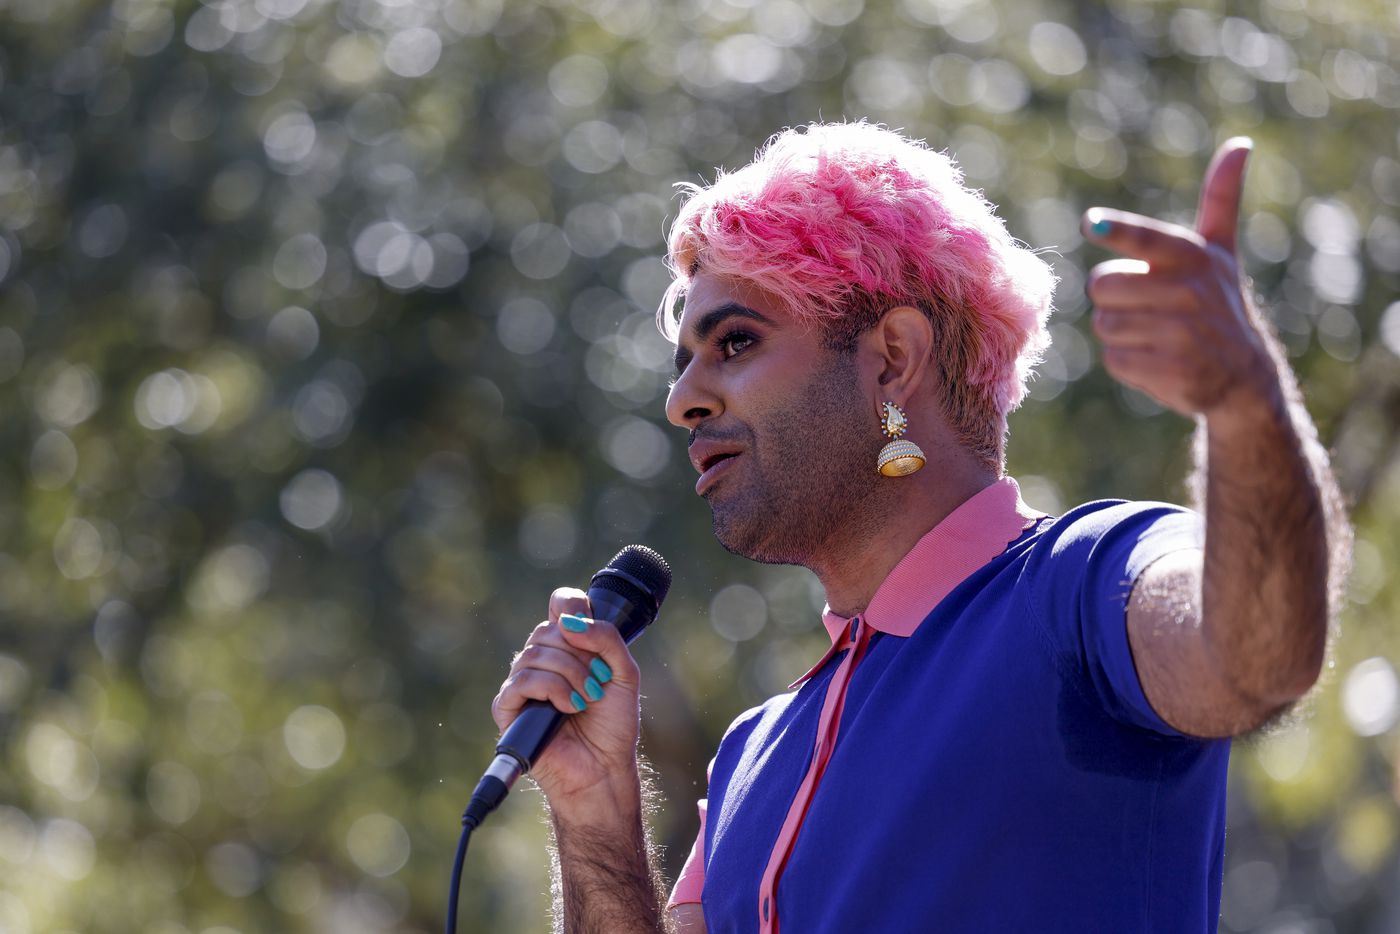 Nonbinary activist Alok Vaid-Menon speaks about their experiences as a transgender person...